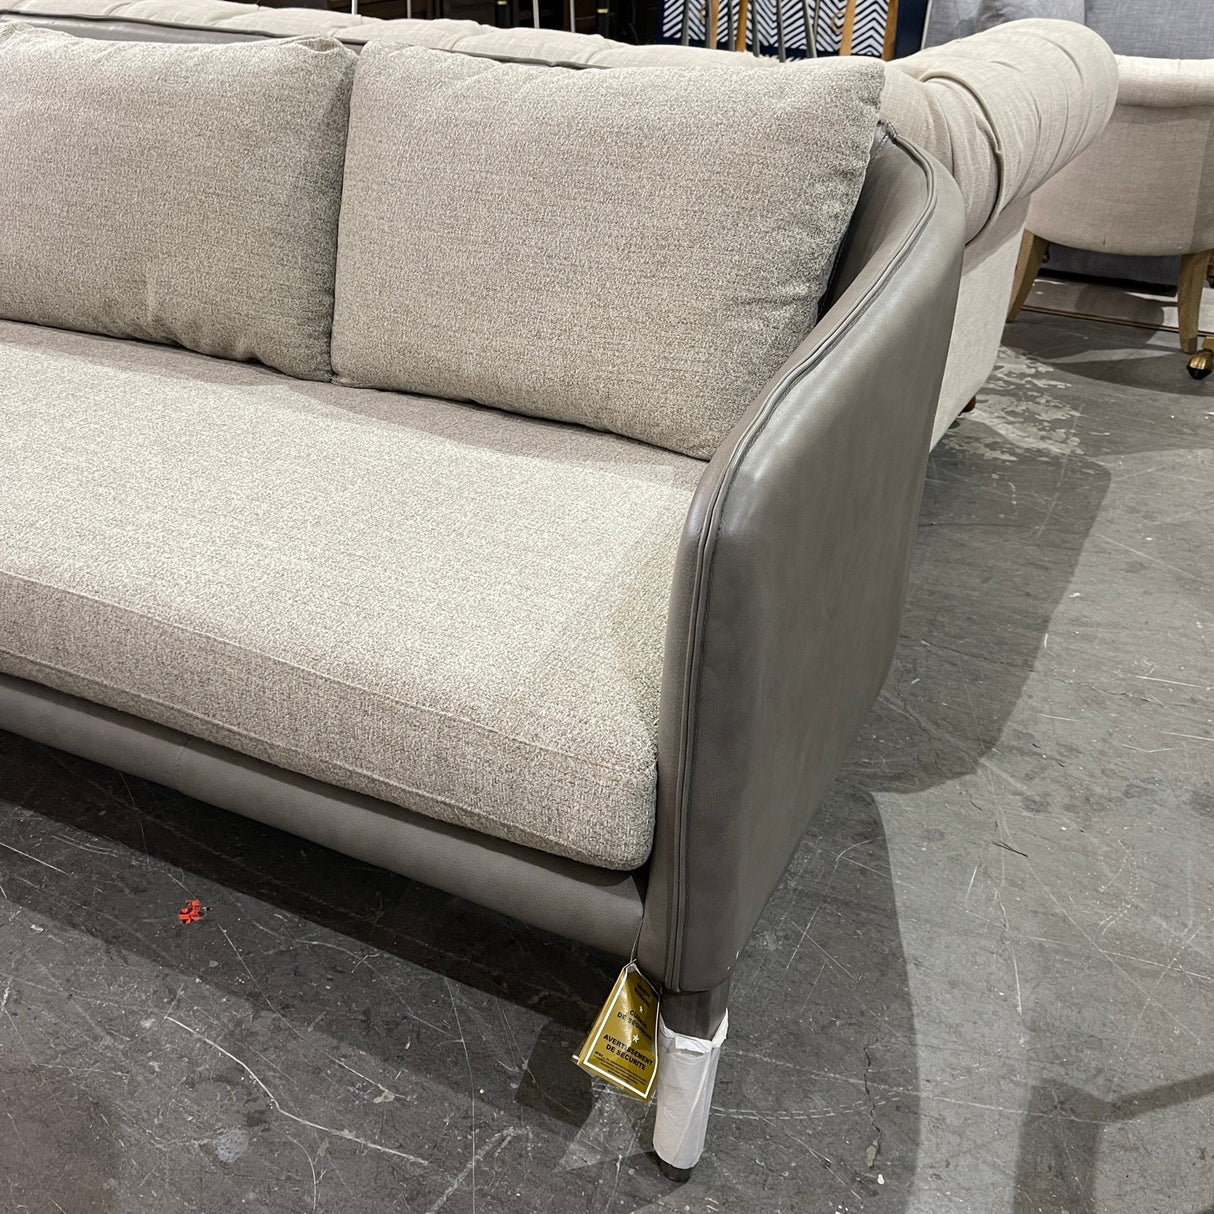 Crate and Barrel leather Sofa - enliven mart